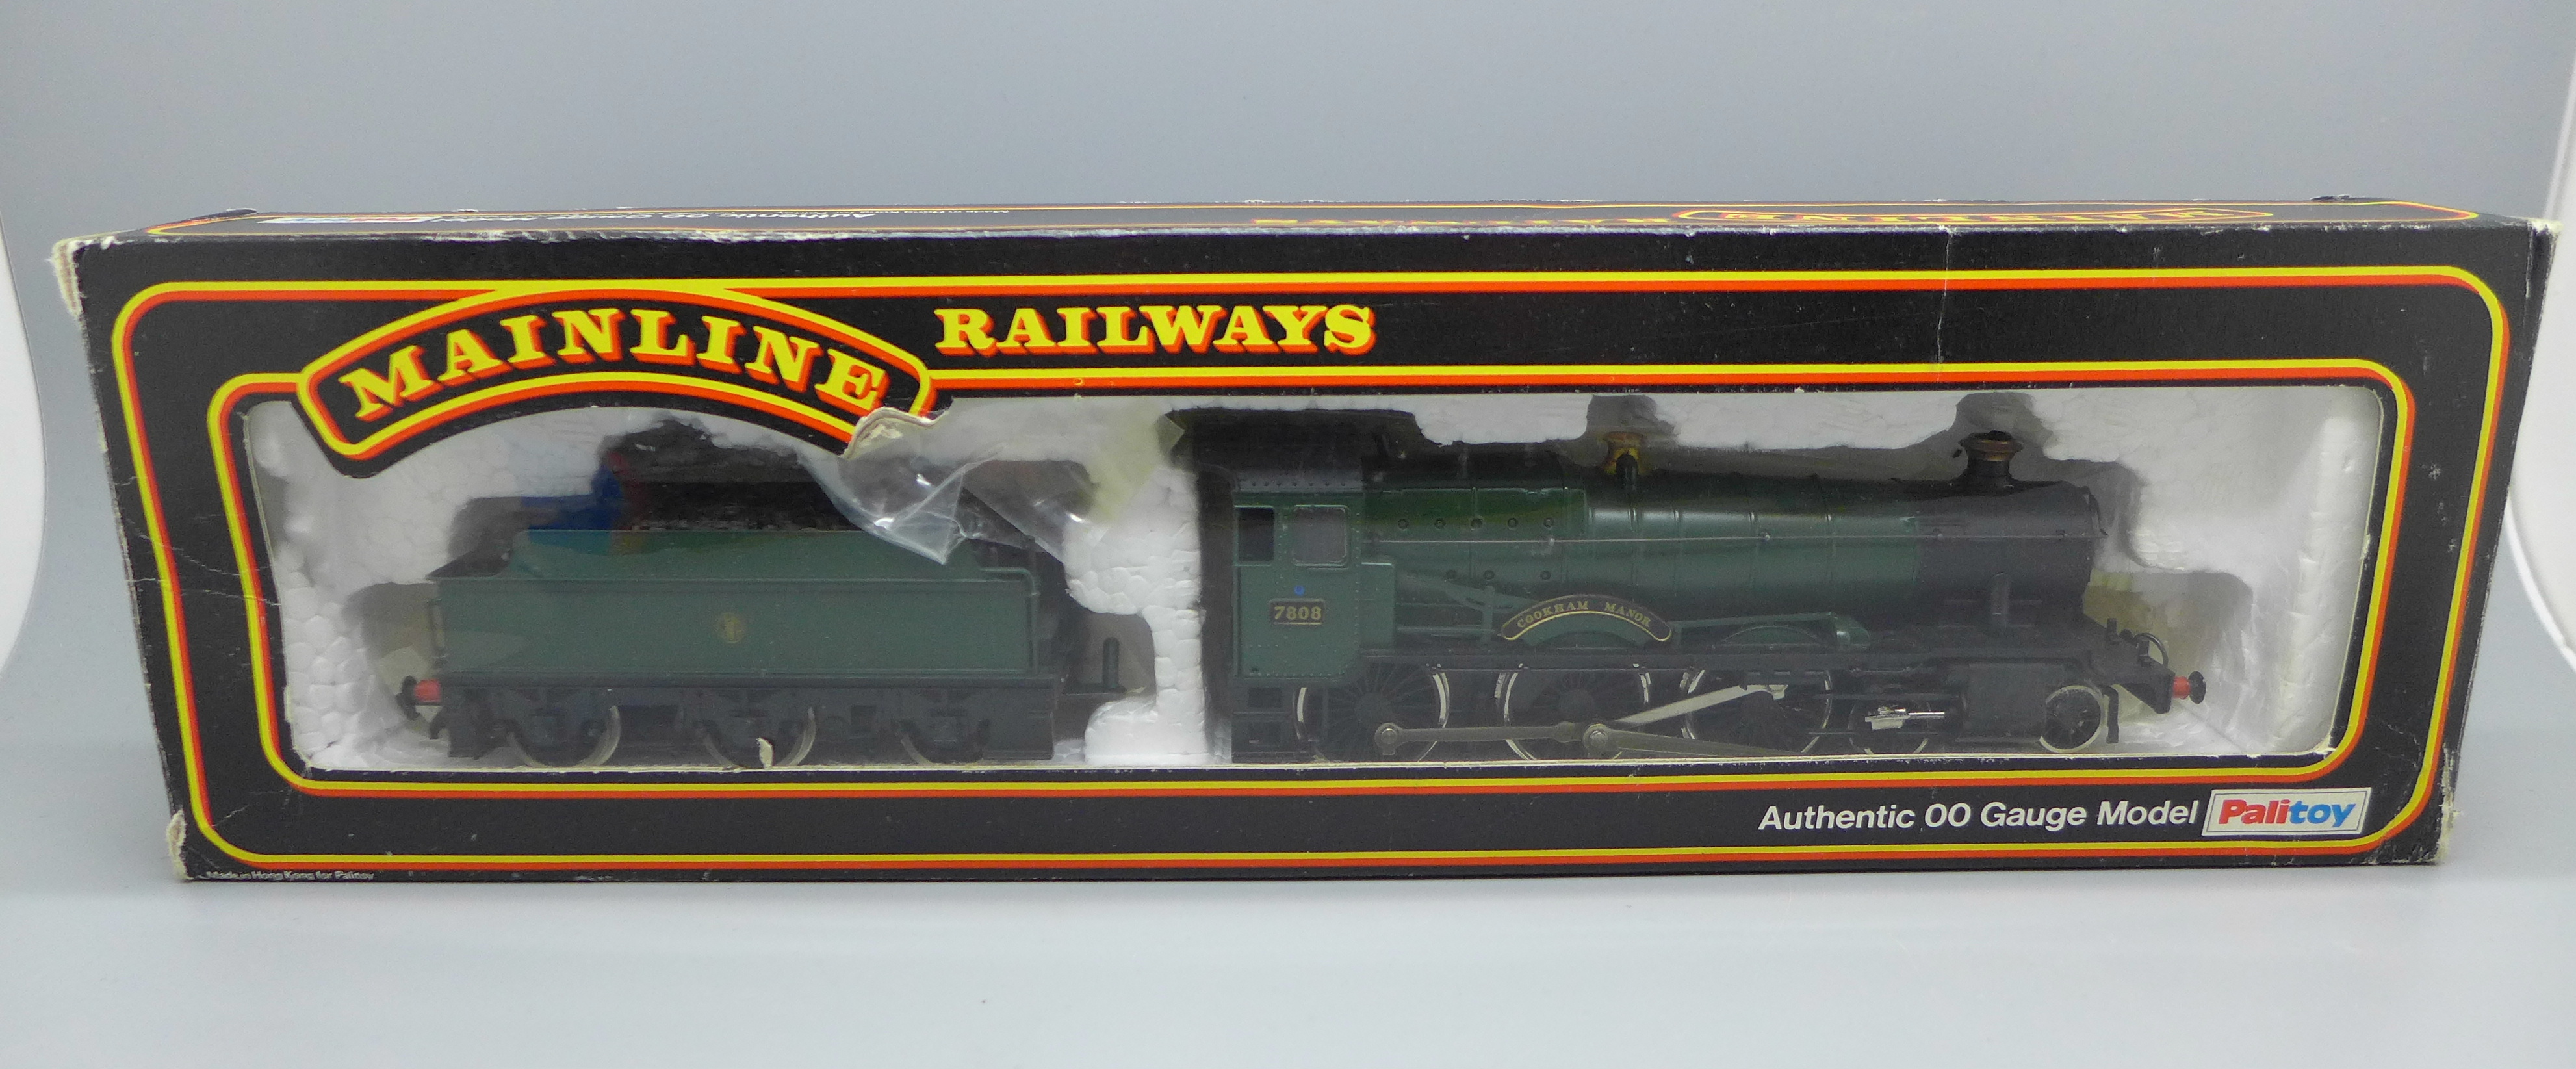 A Mainline OO gauge locomotive and tender, 4-6-0 Manor Class boxed